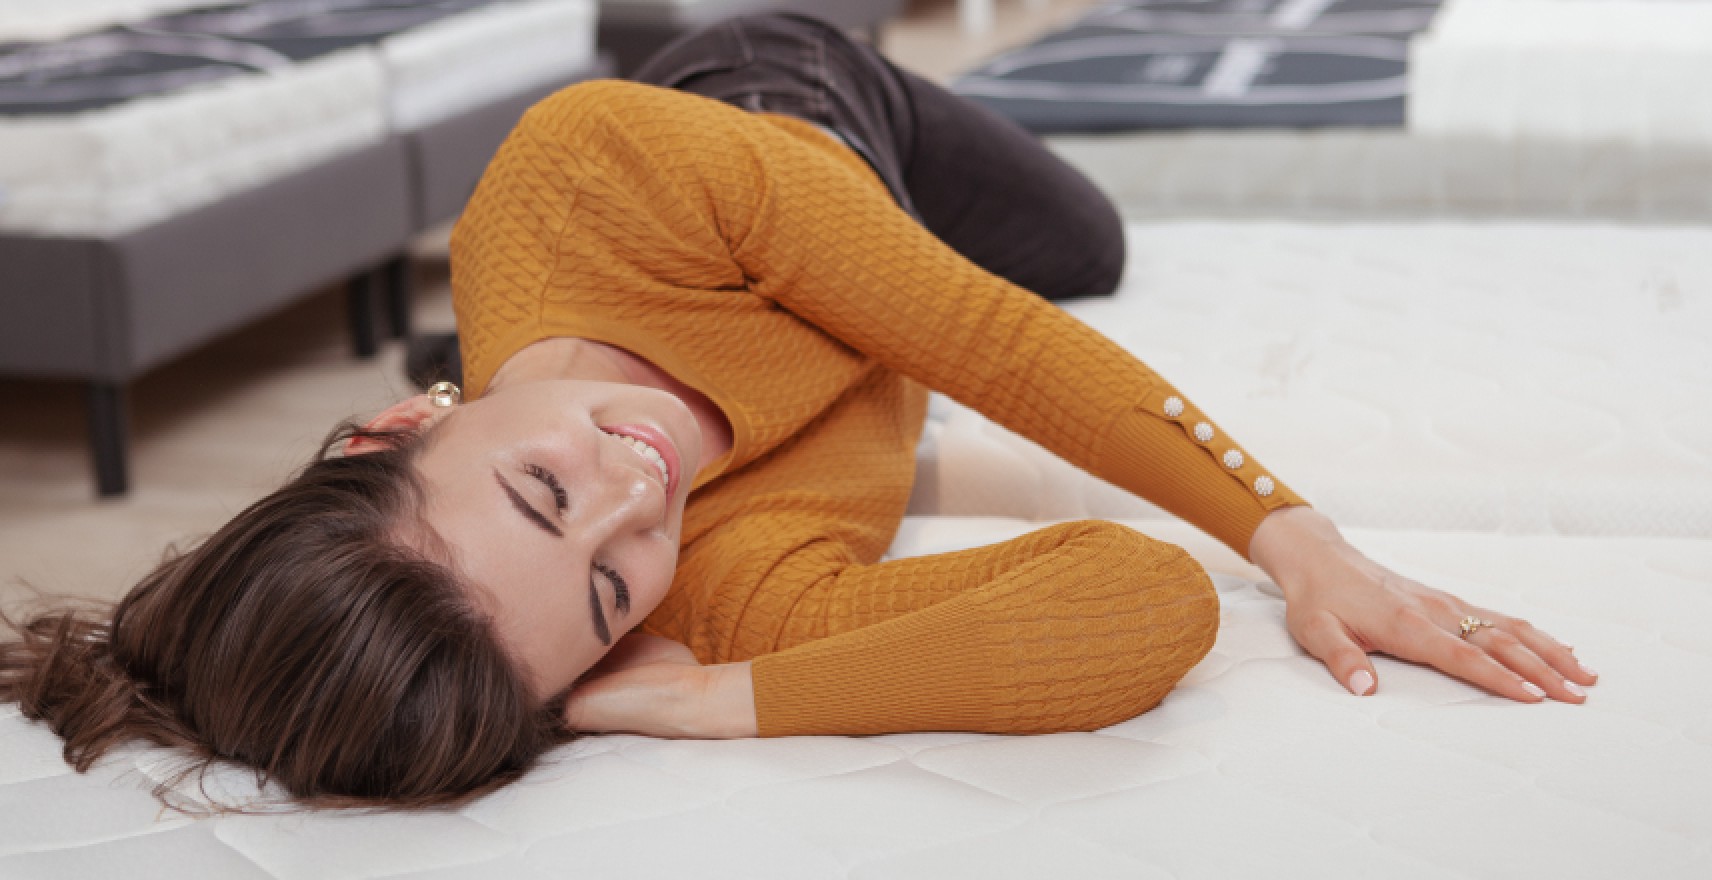 Woman trying out new mattress in store